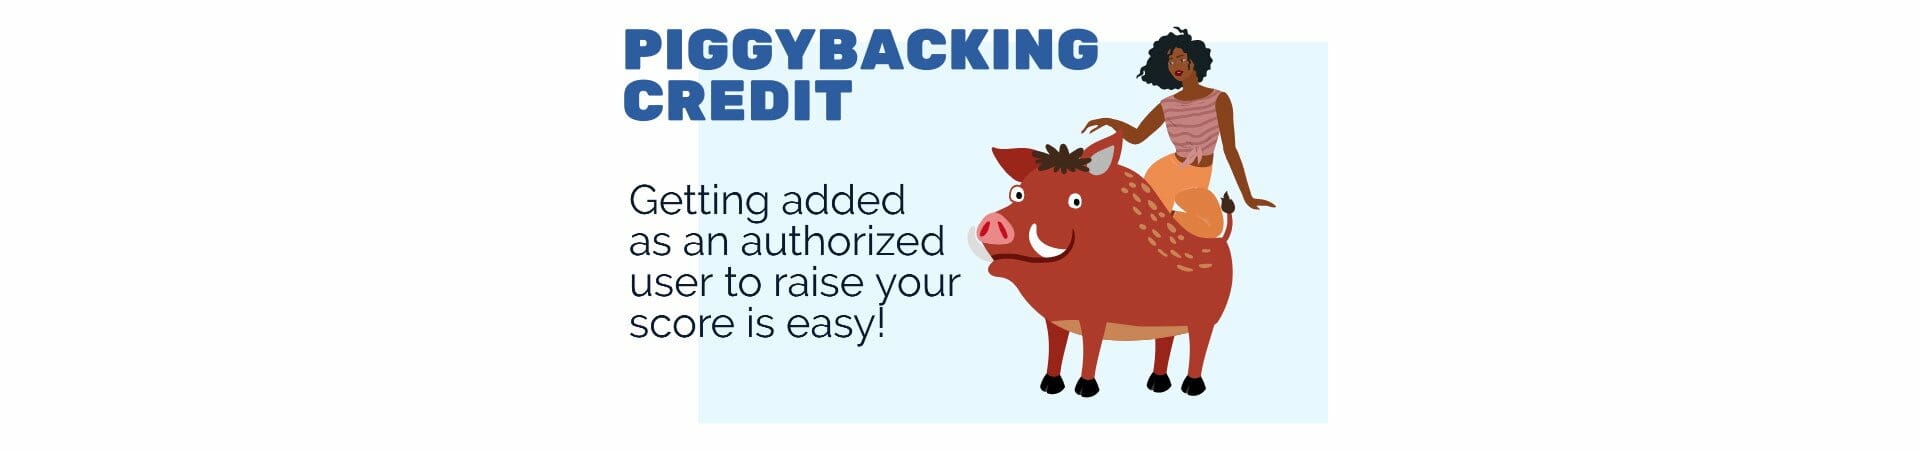 piggybacking credit by adding an authorized user